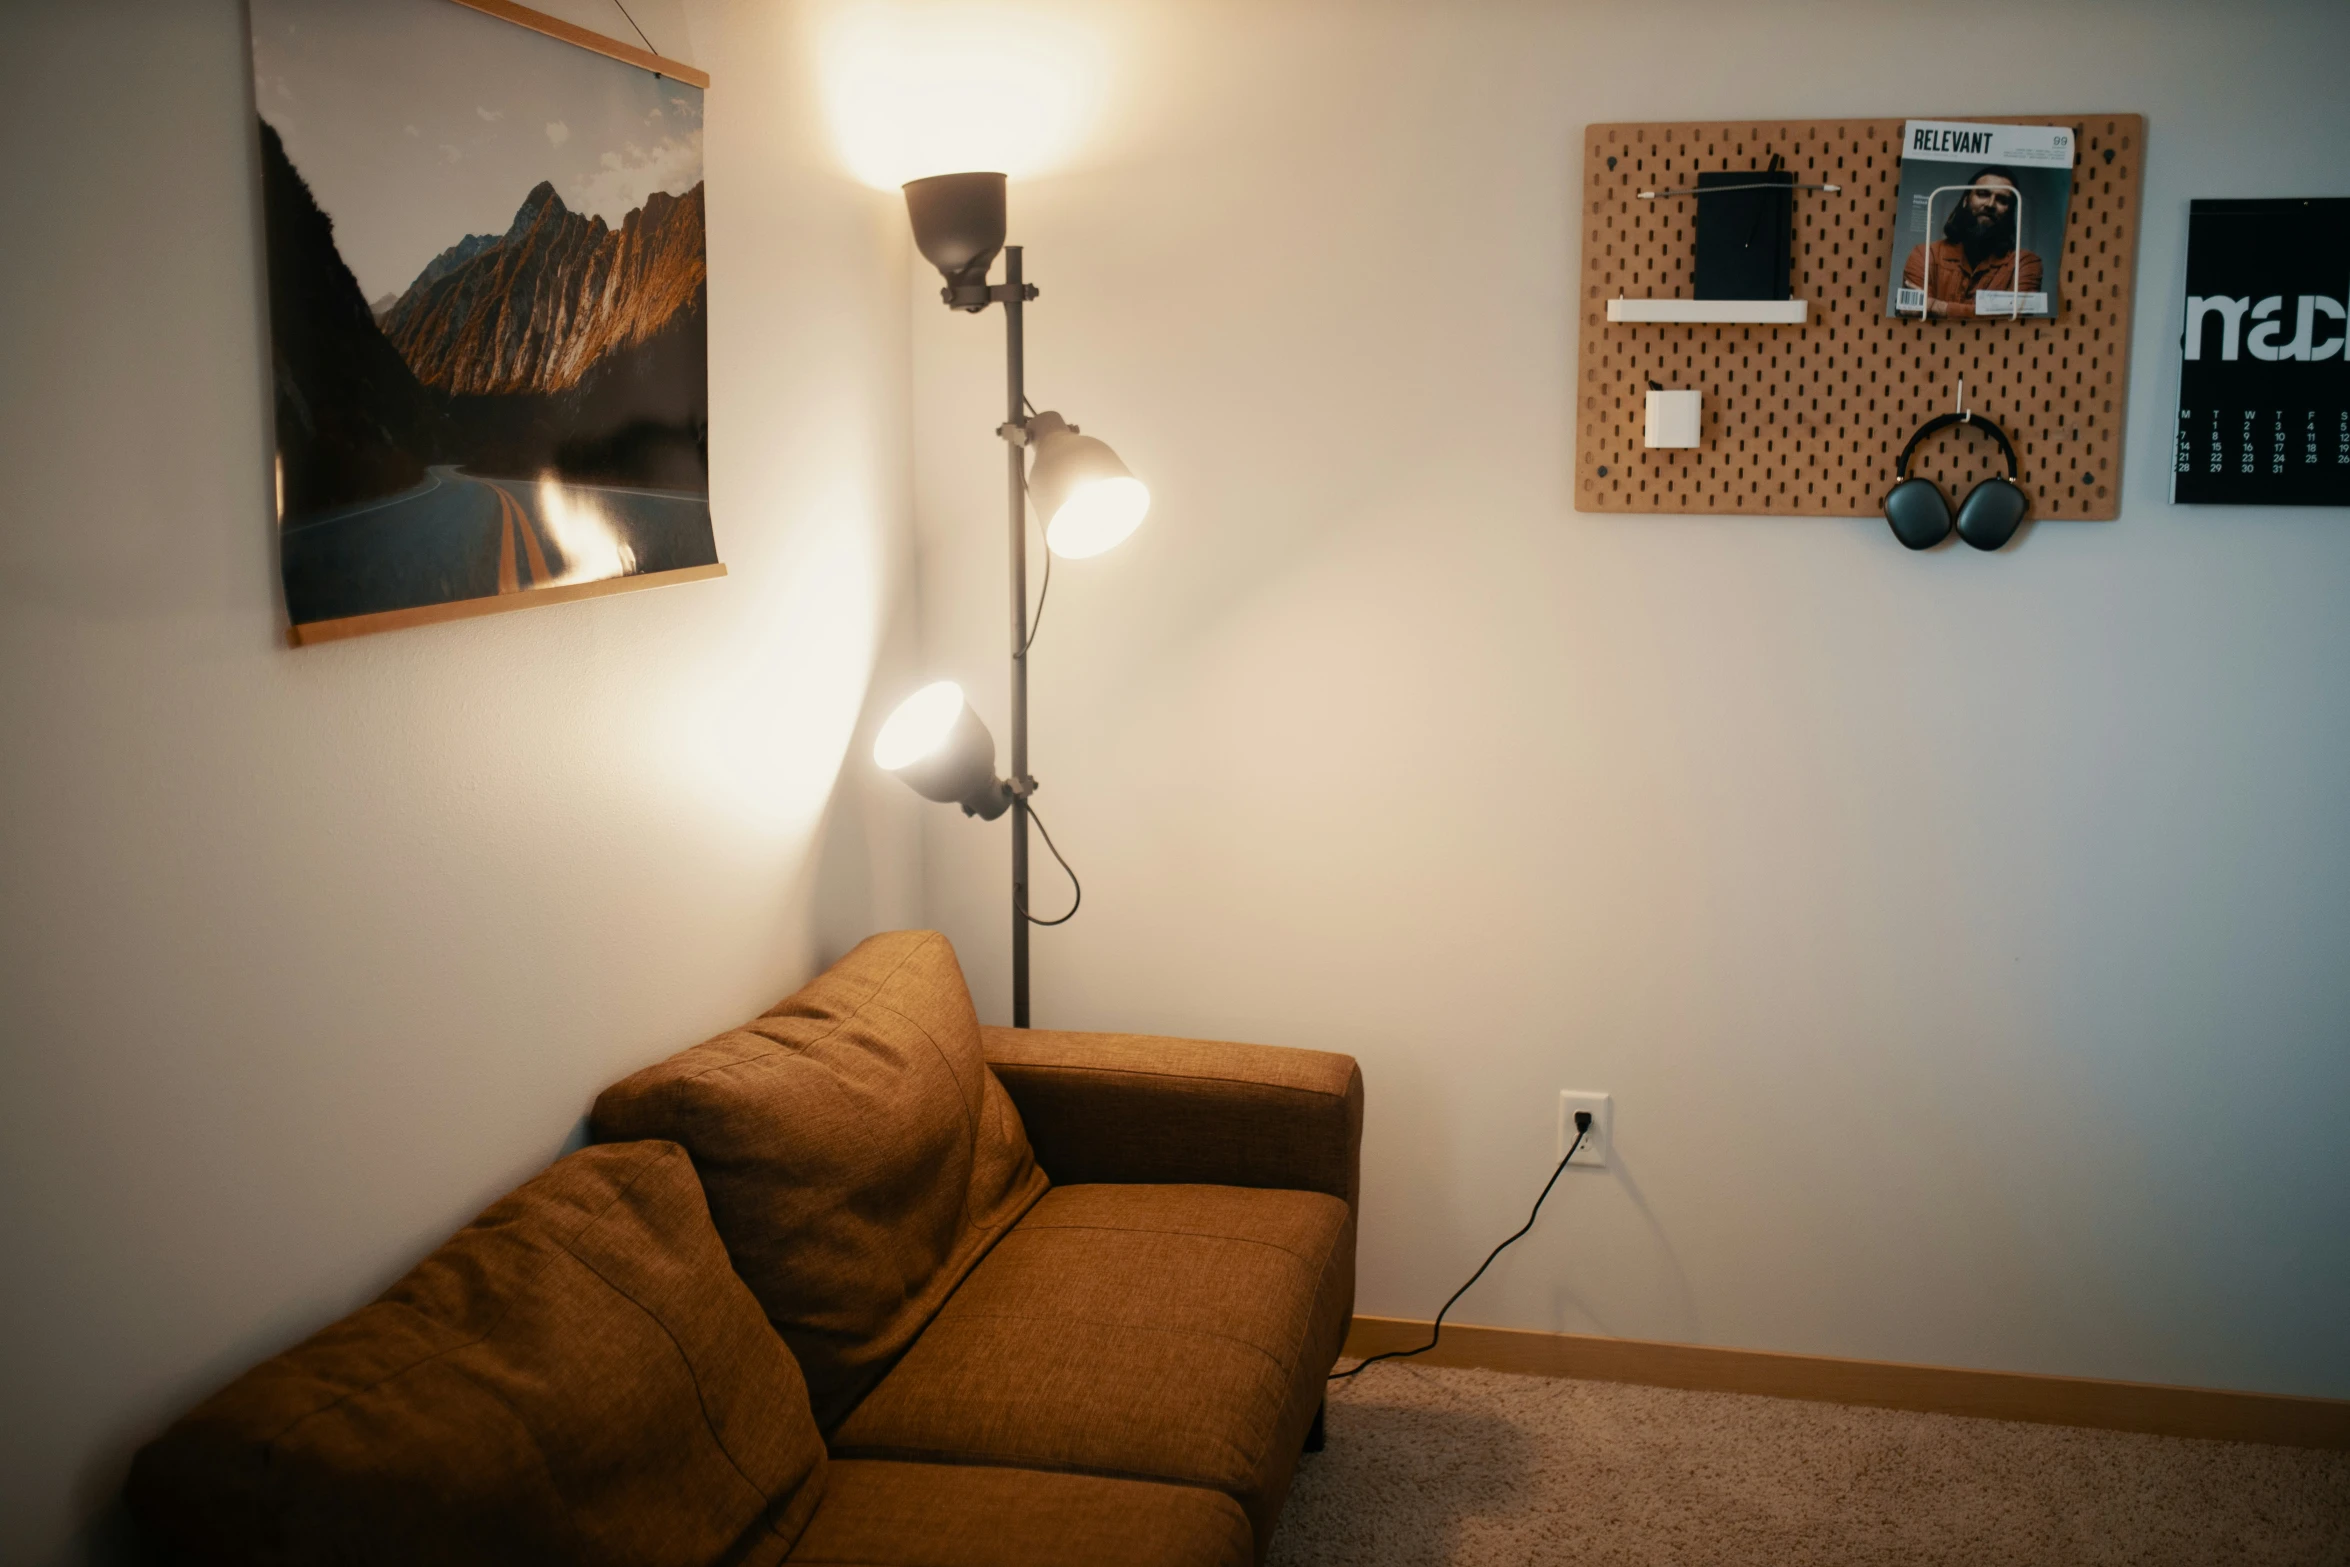 a couch with a light, and some pictures above it